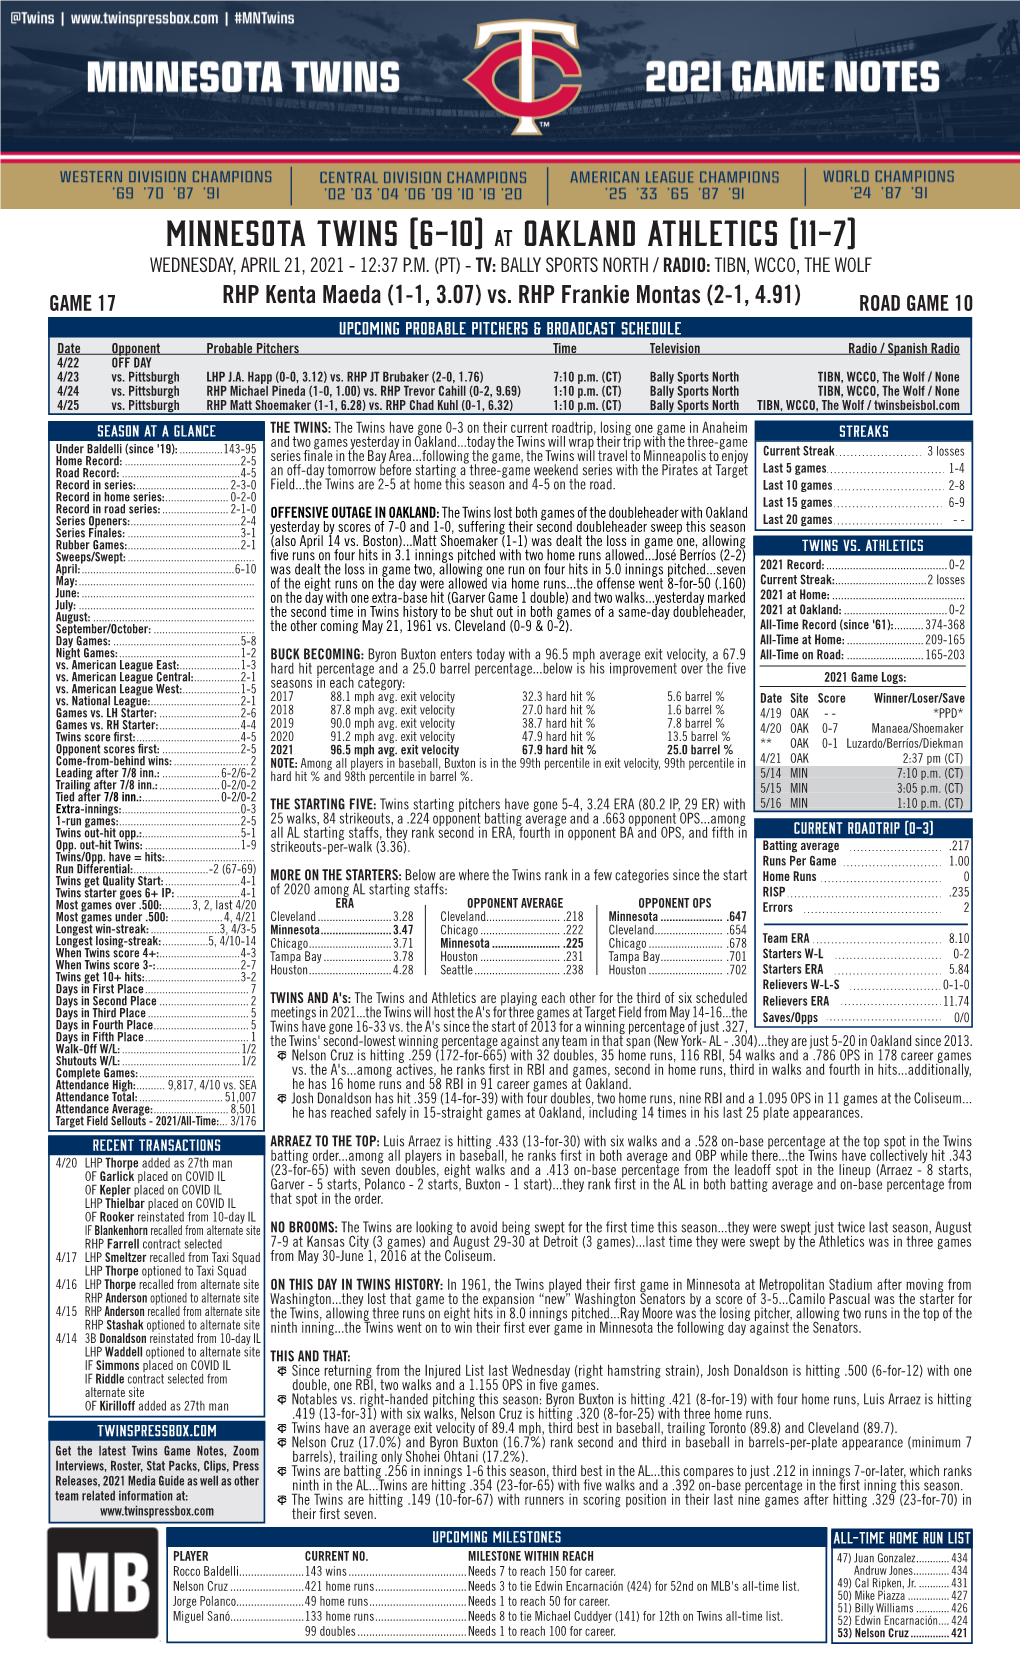 Twins Notes, 4-21 At